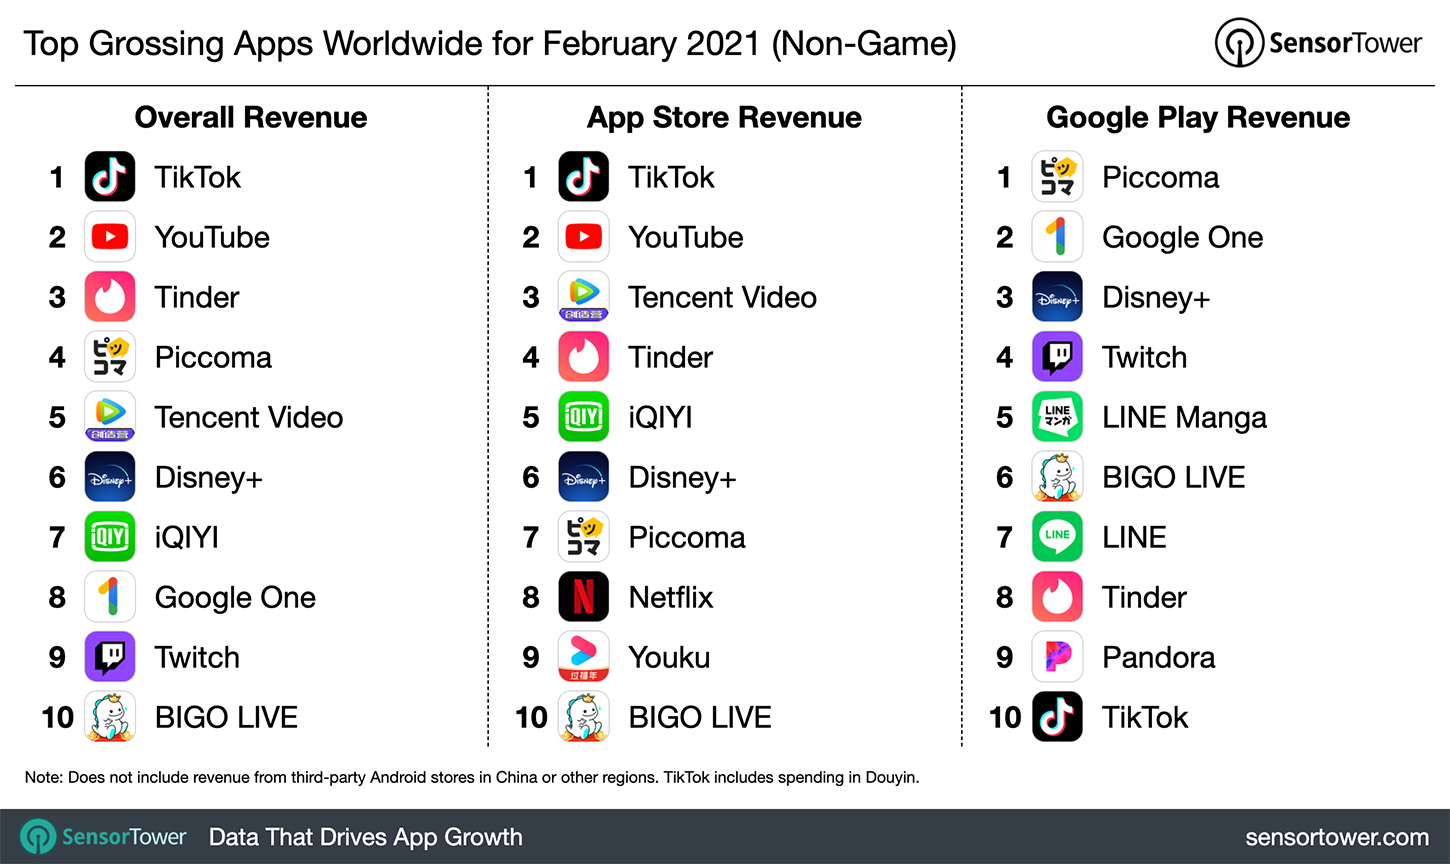 “Top Grossing Apps Worldwide for February 2021